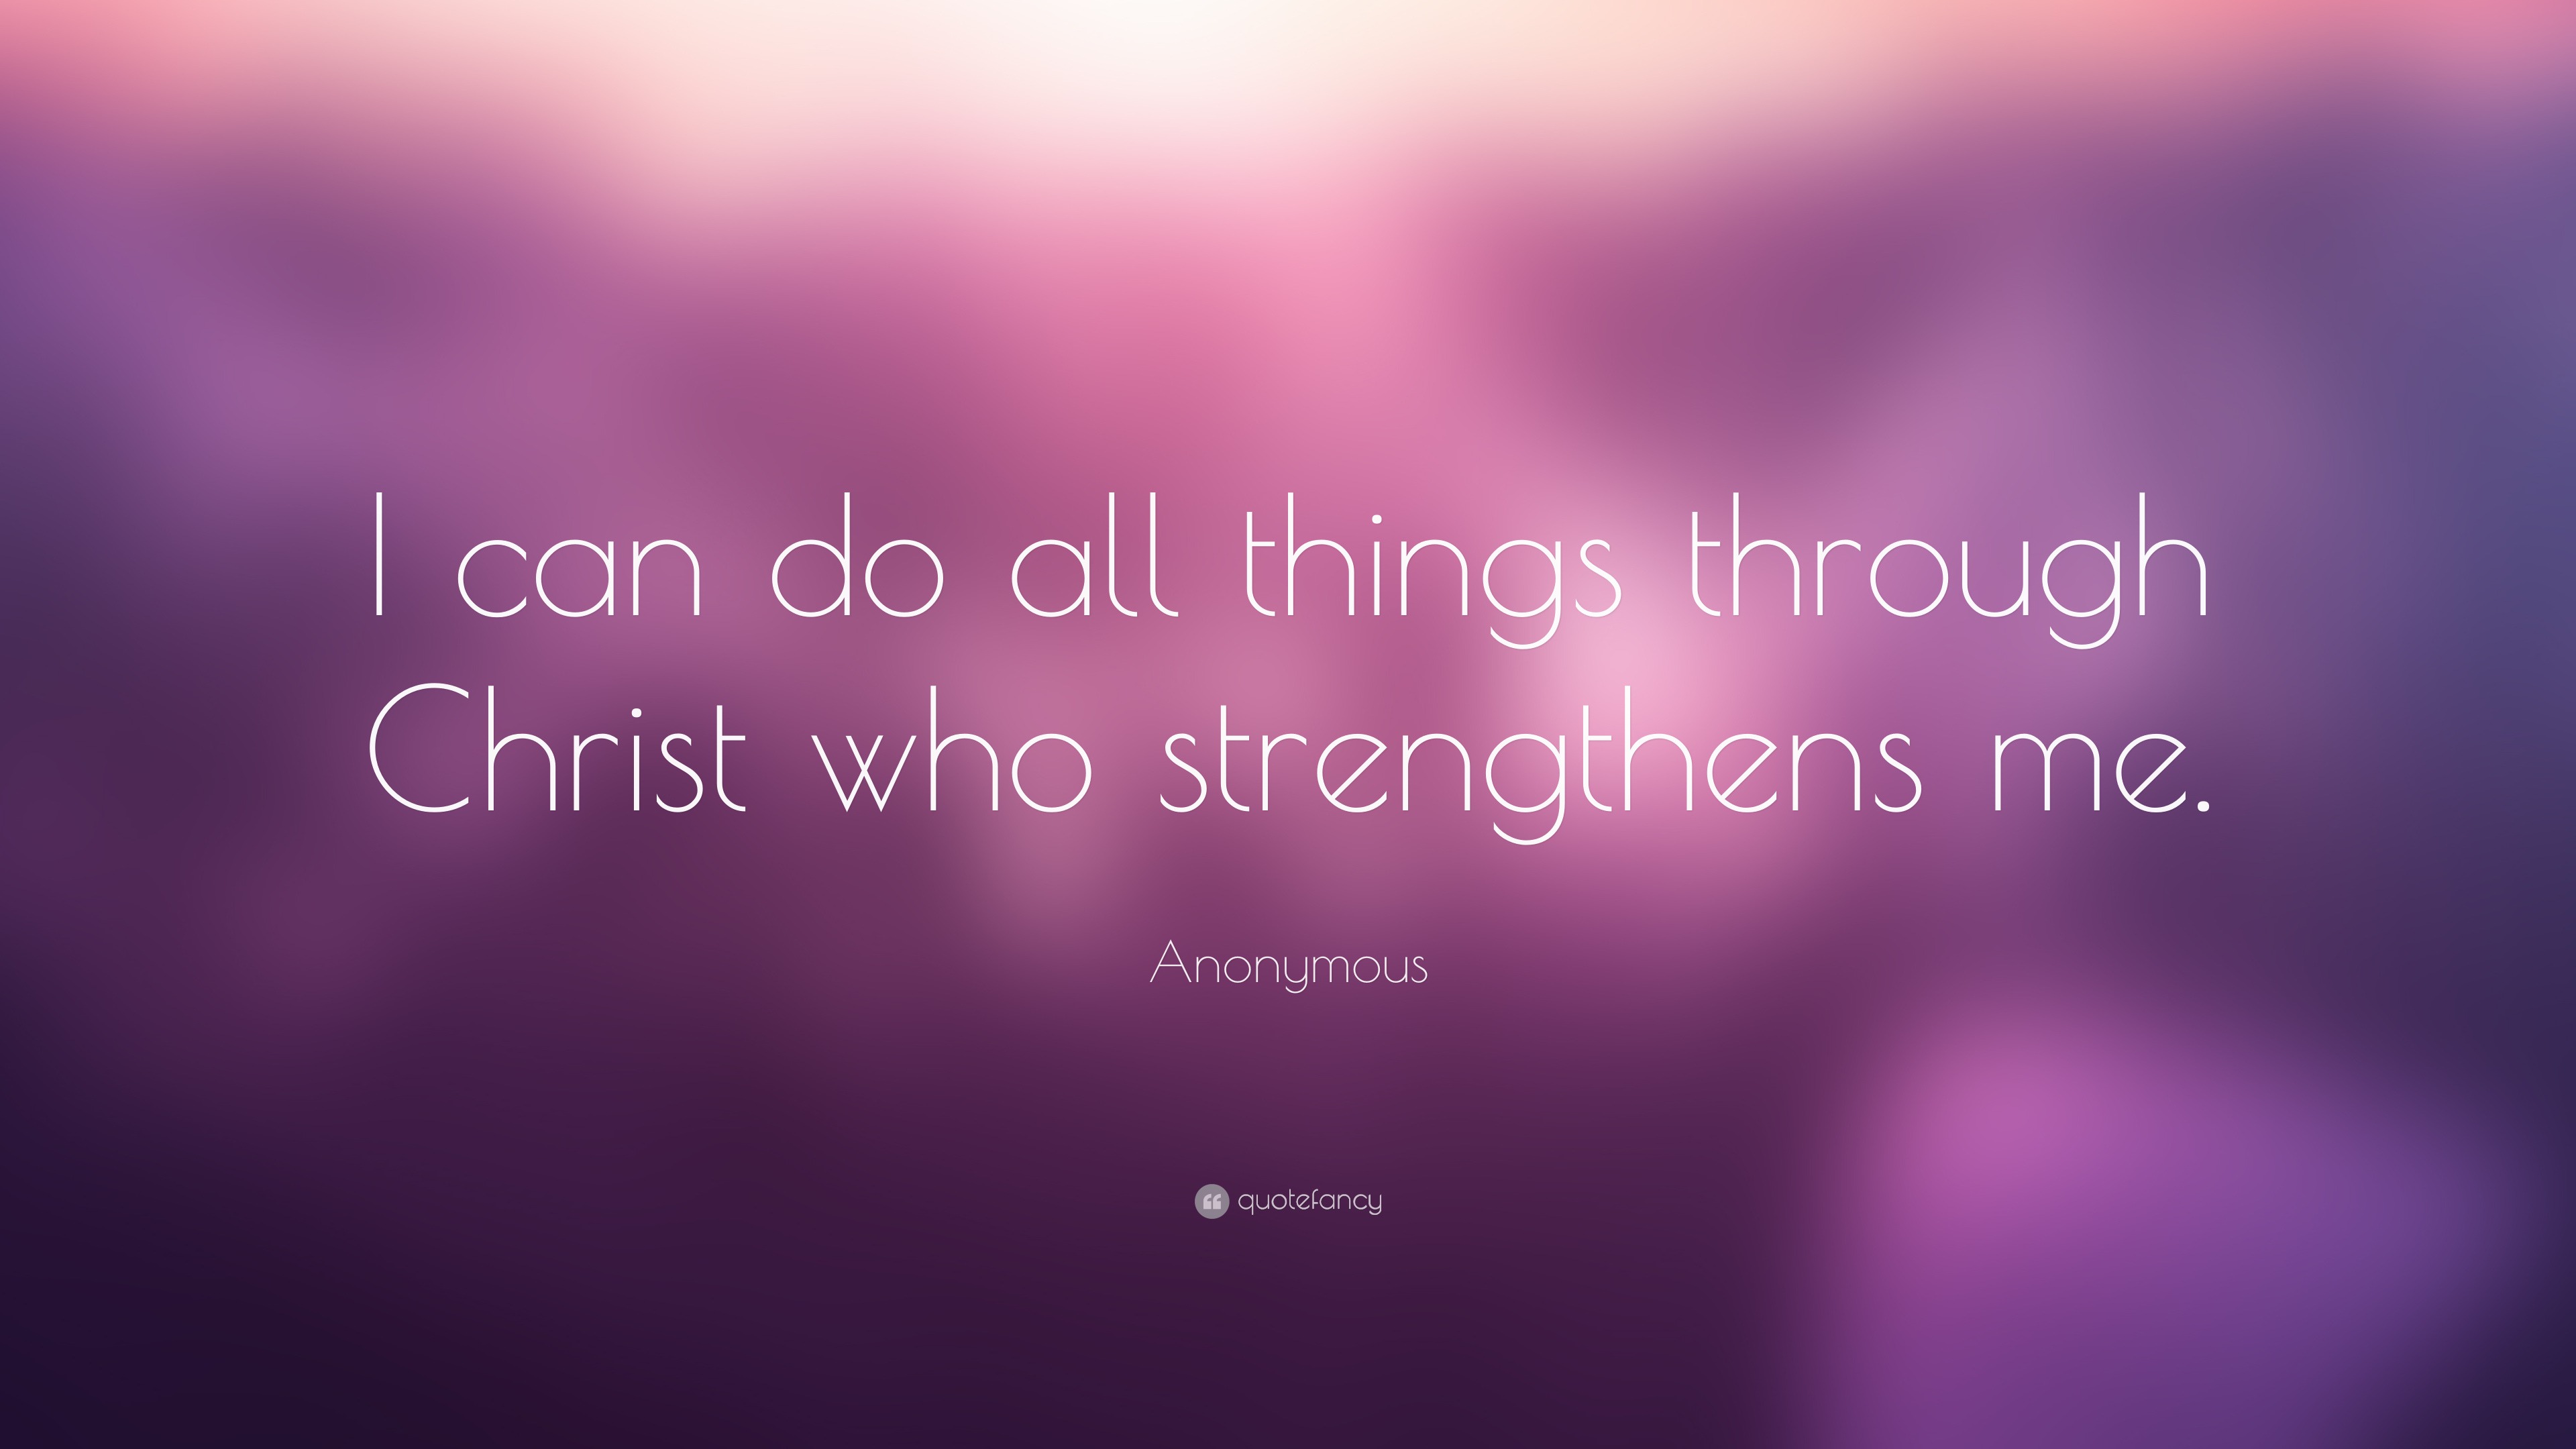 i can do all things through christ who strengthens me wallpaper sports